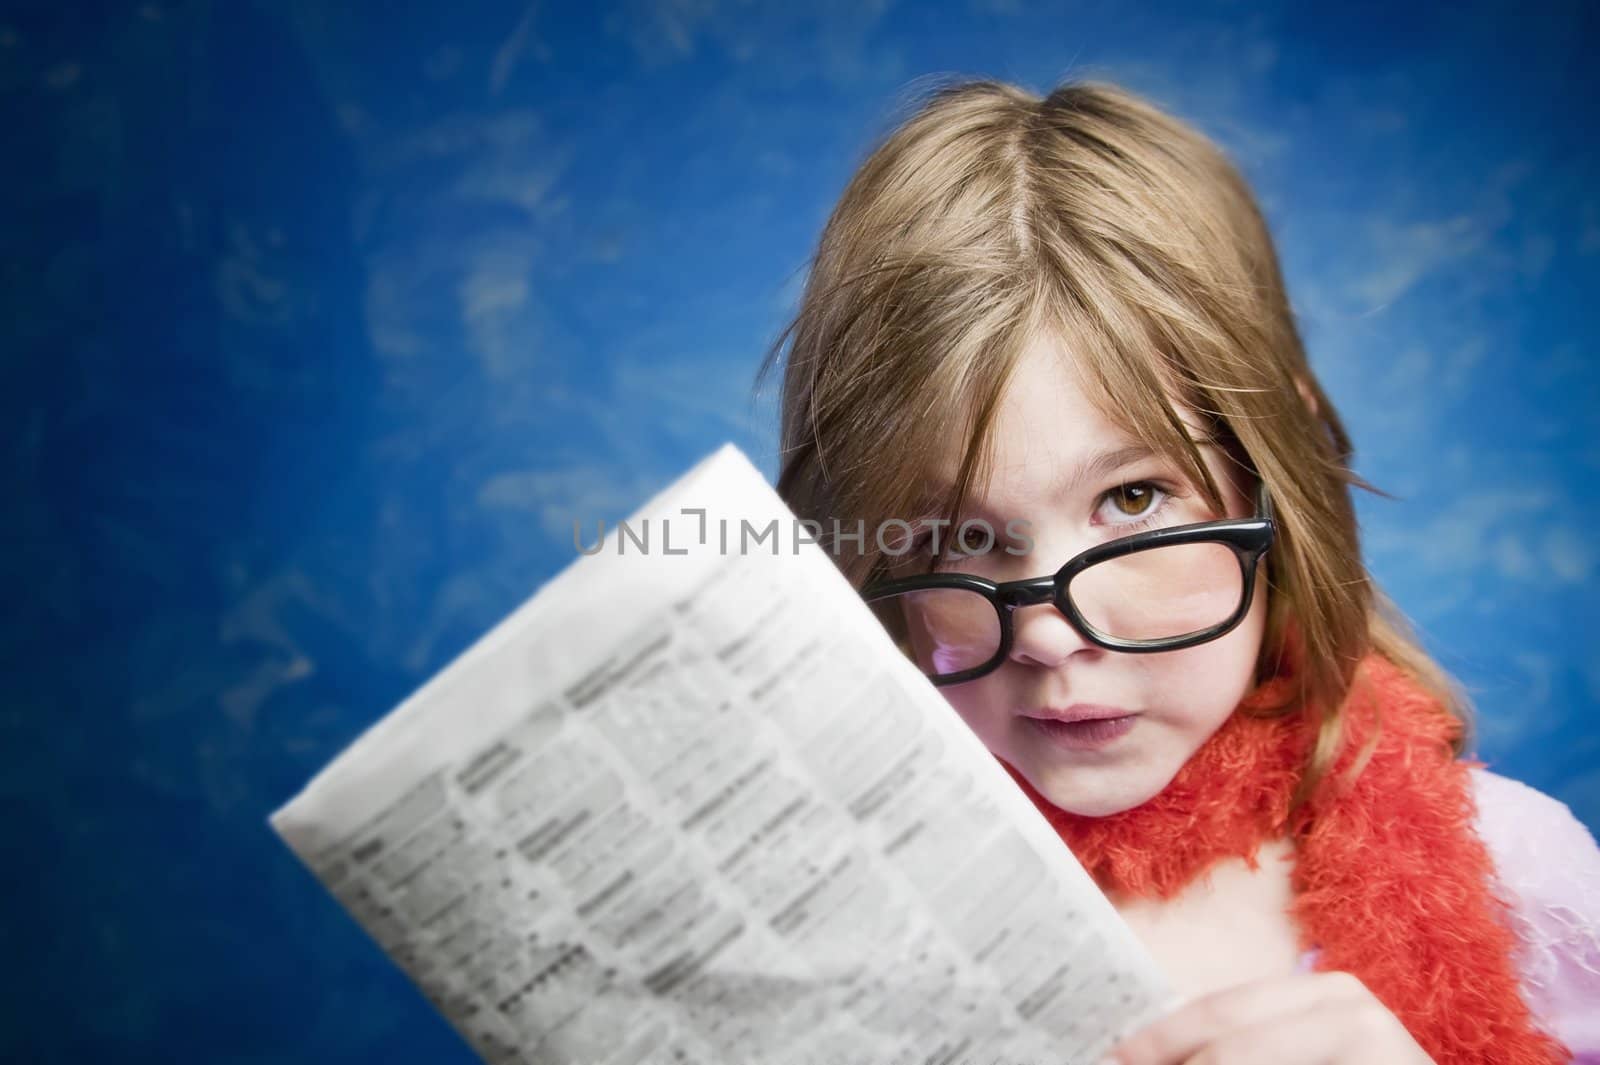 Young Girl Dressed Up in Reading Glasses Reading a Newspaper